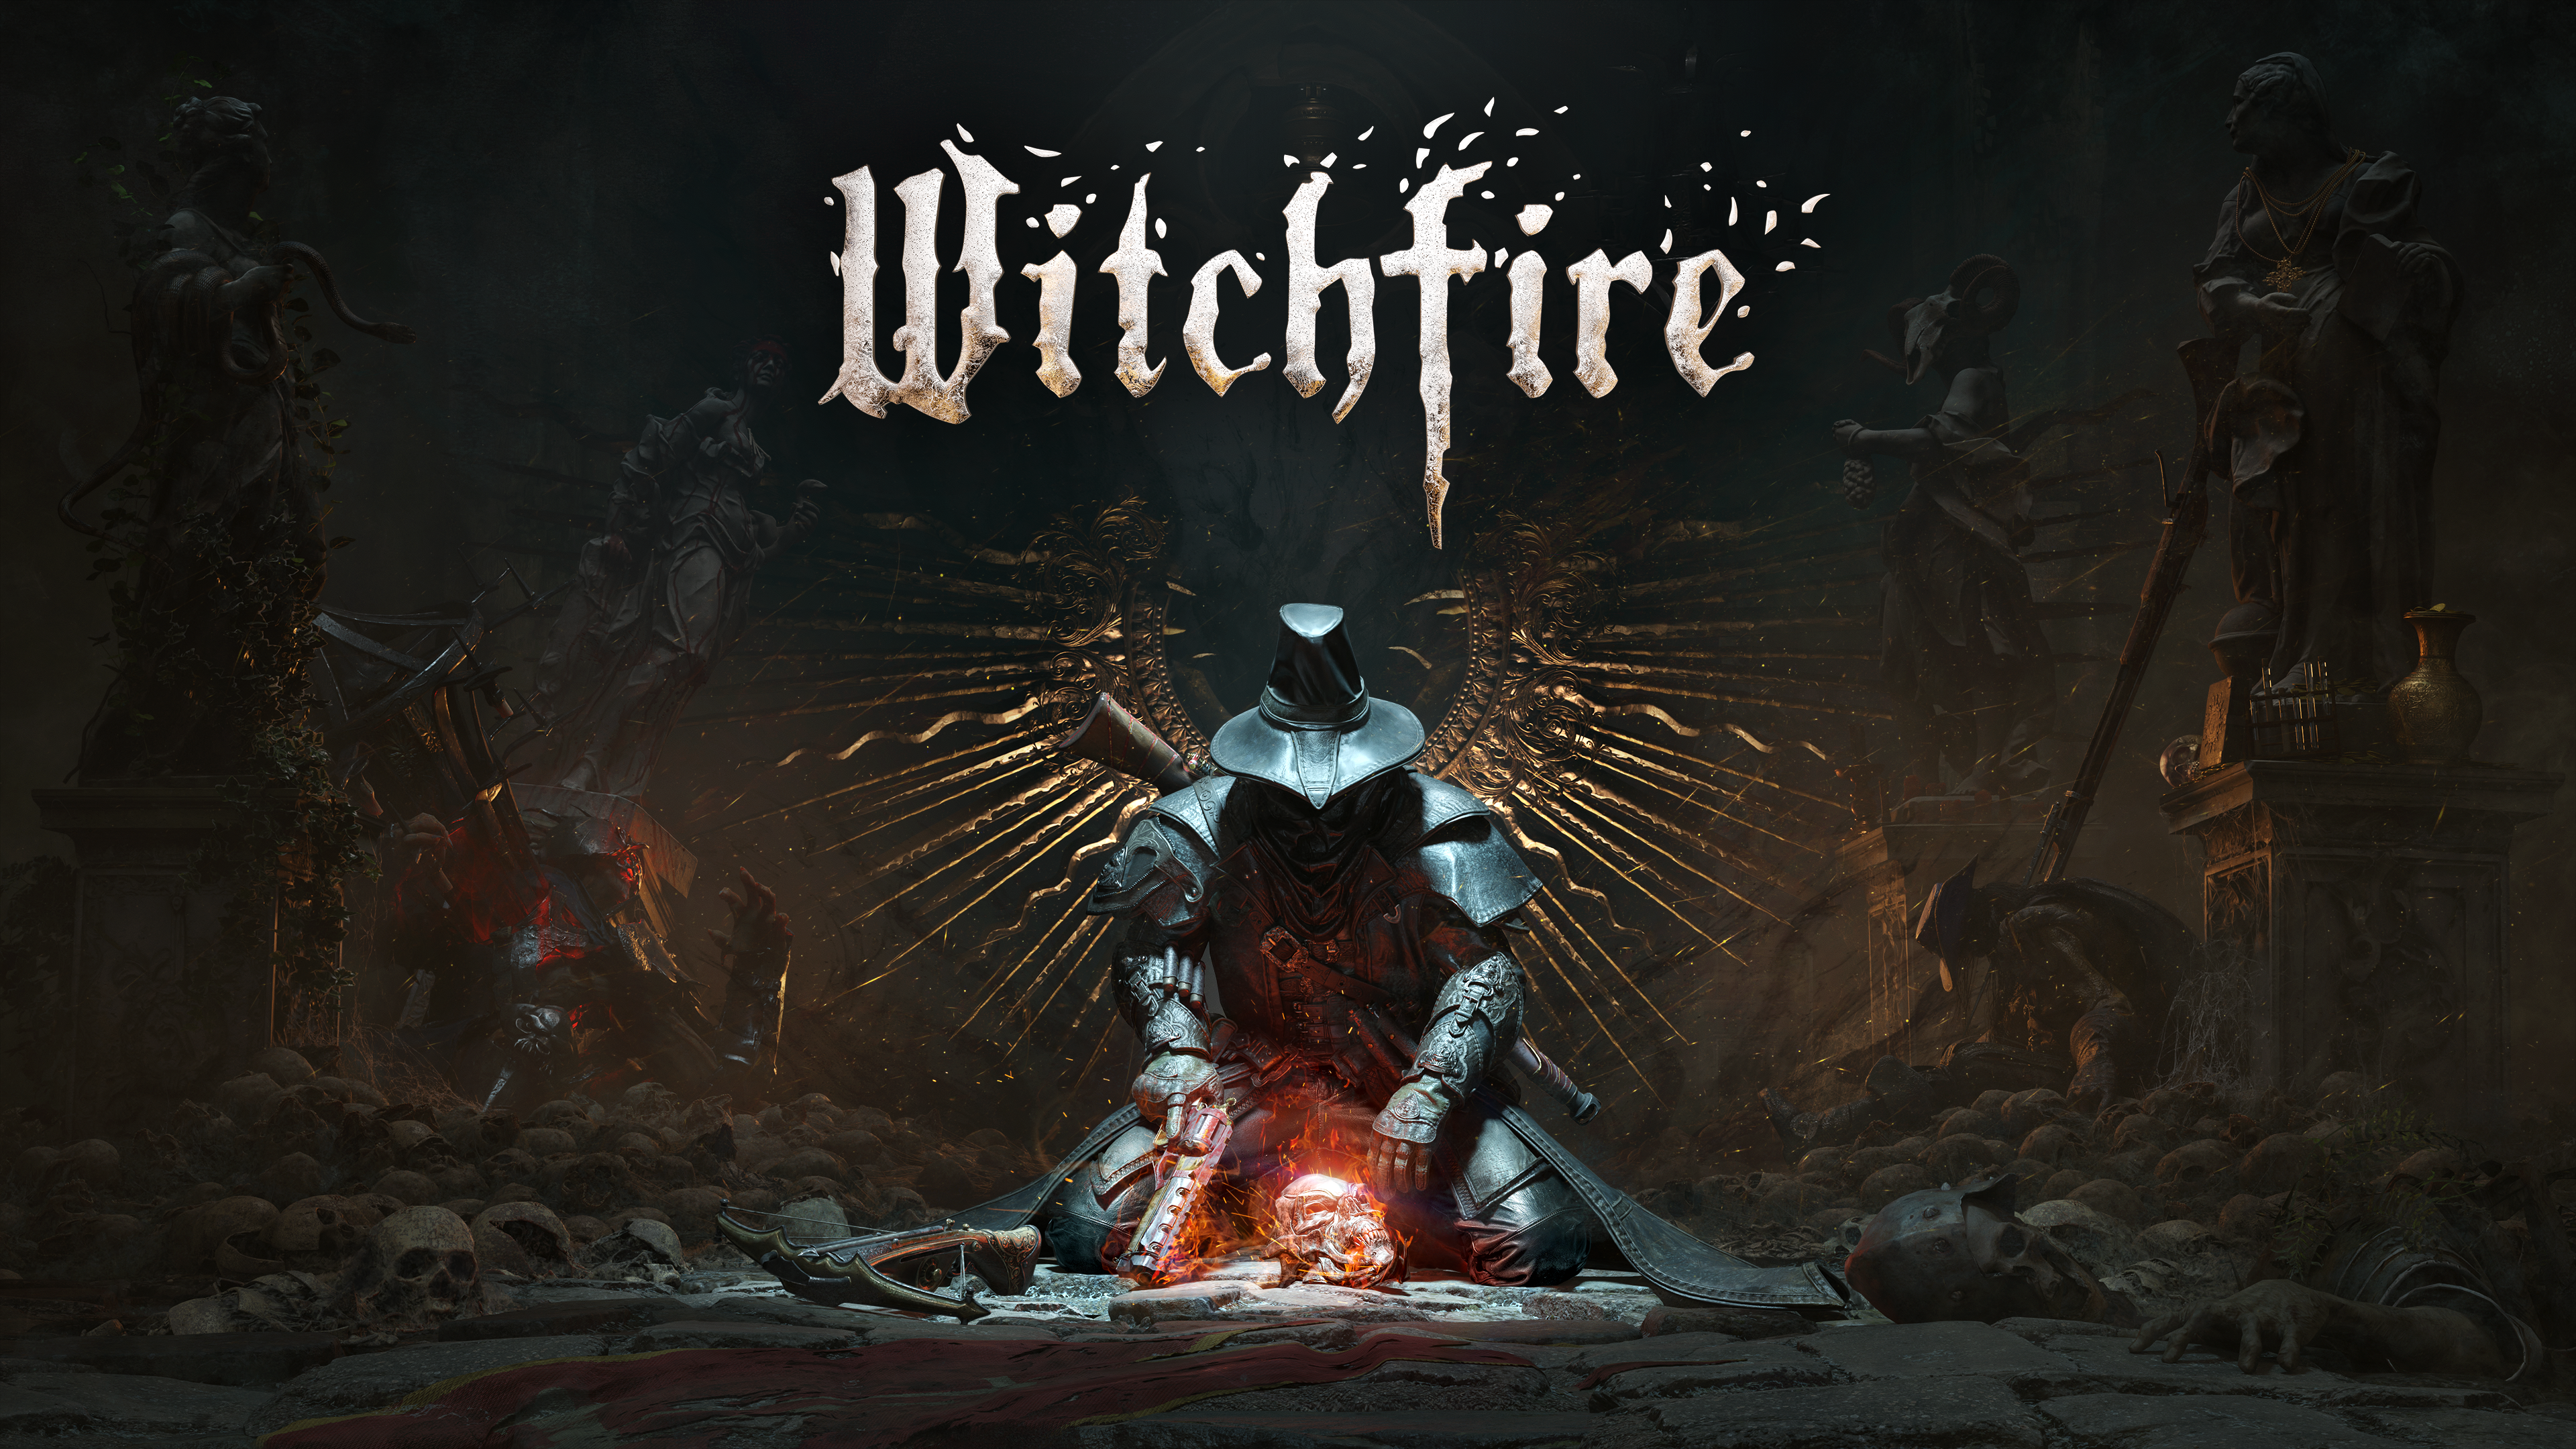 Witchfire Video Game Art Video Games Armor Skull Crossbow Gun Statue Wings Title 3840x2160